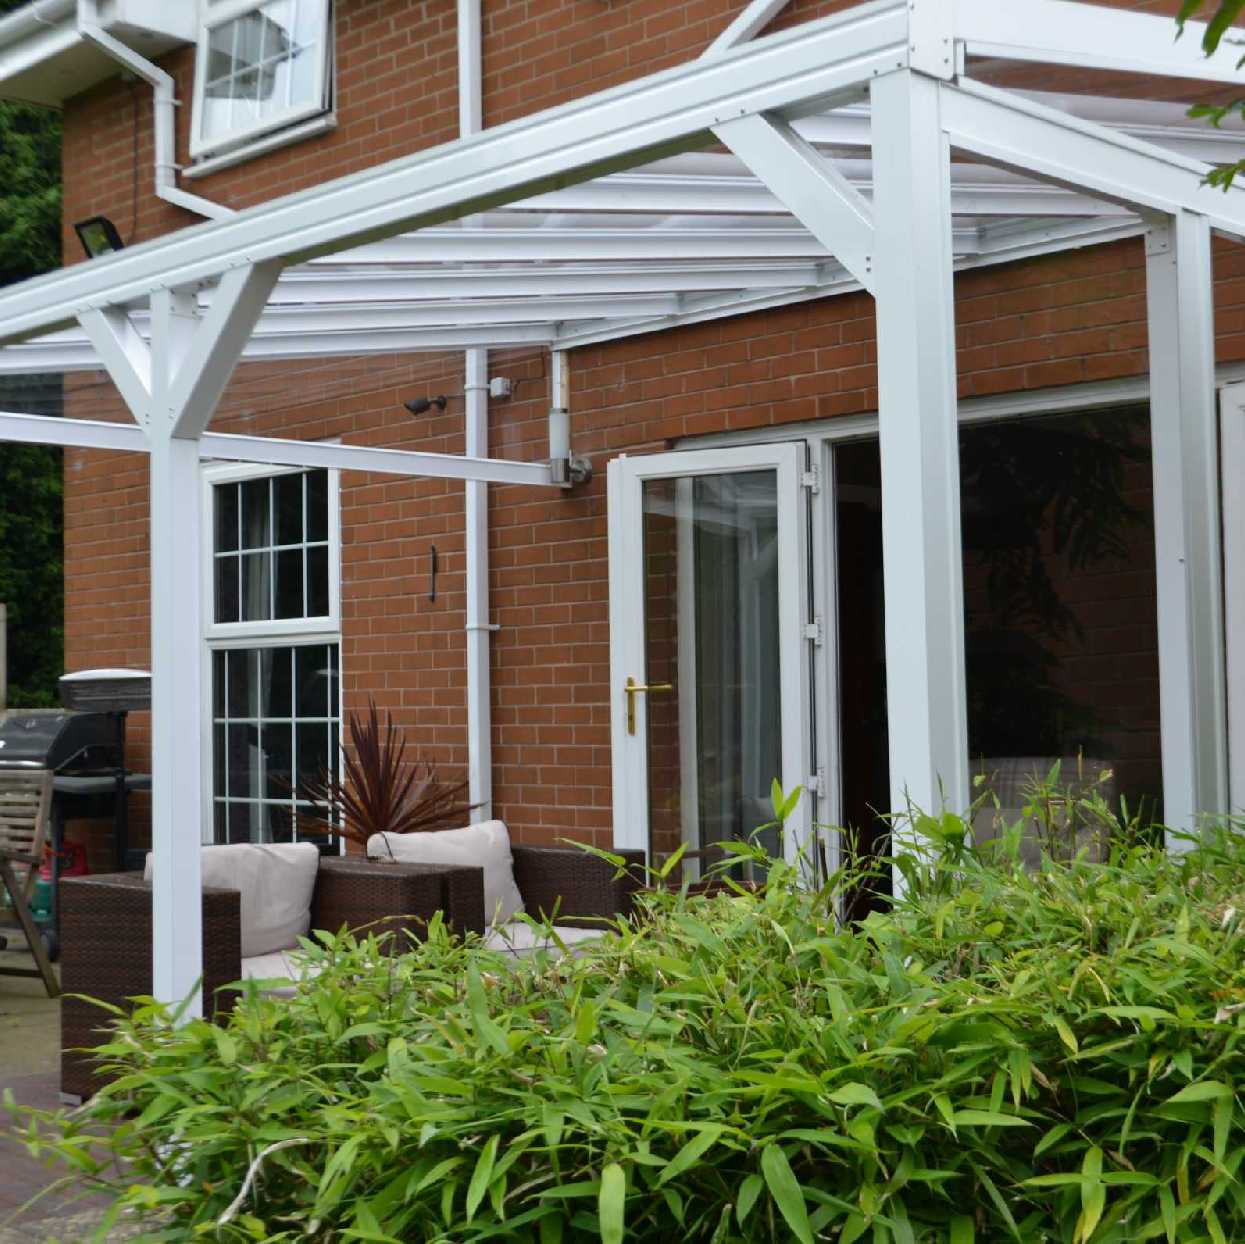 Omega Smart Lean-To Canopy, White with 6mm Glass Clear Plate Polycarbonate Glazing - 6.3m (W) x 3.5m (P), (4) Supporting Posts from Omega Build